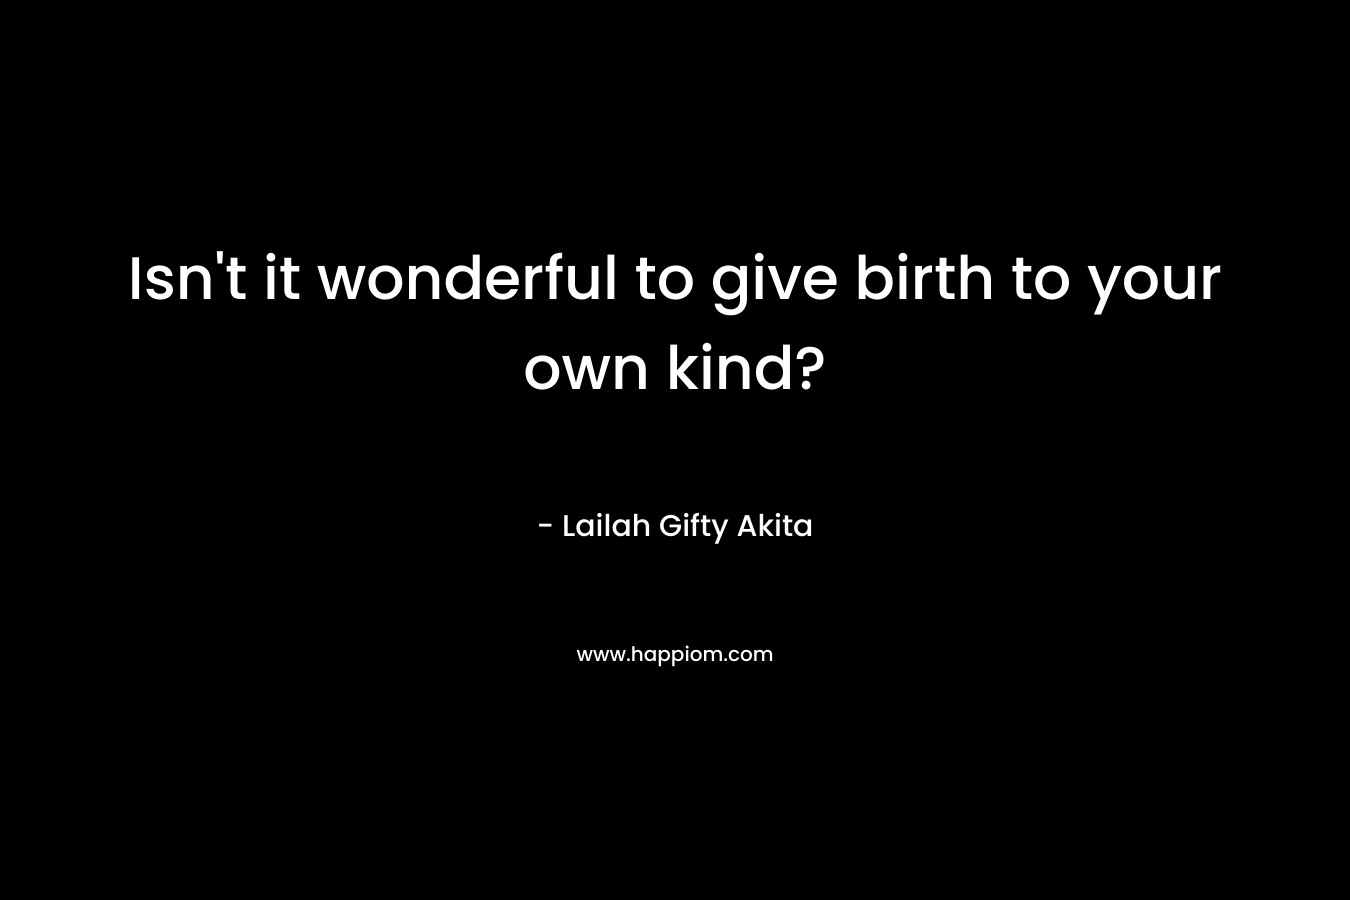 Isn't it wonderful to give birth to your own kind?